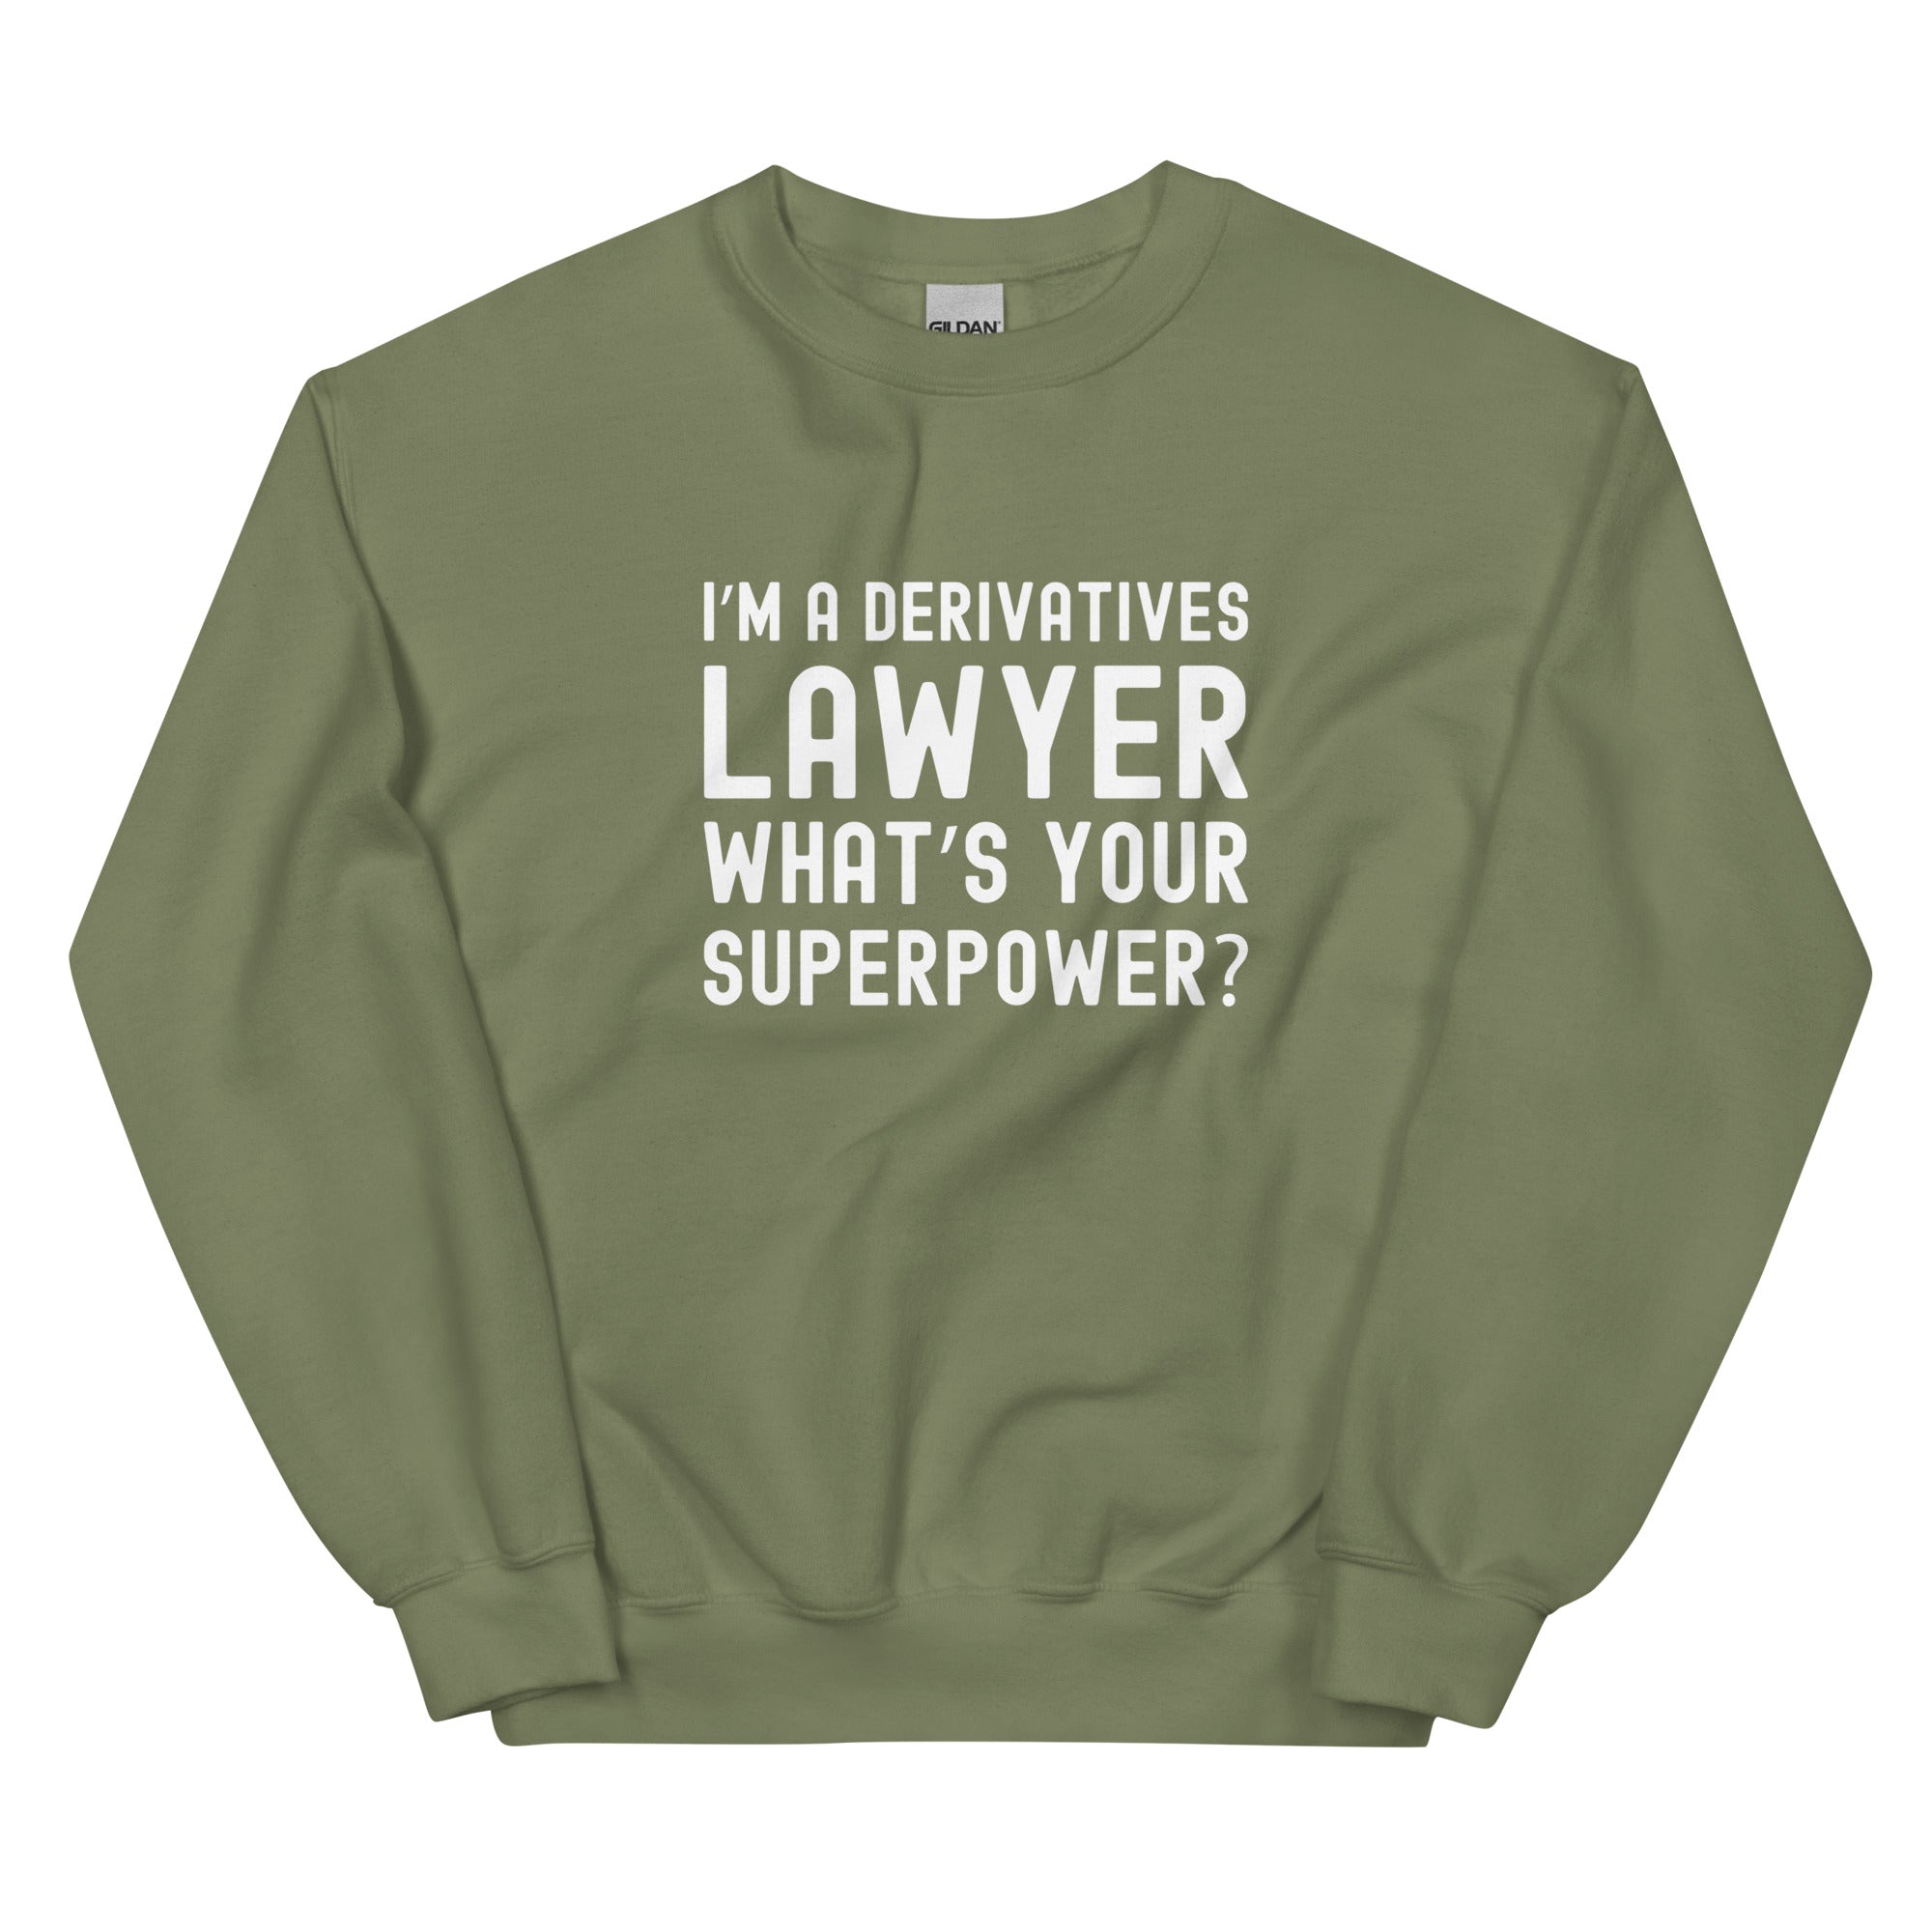 Unisex Sweatshirt | I’m a derivatives lawyer, what’s your superpower?